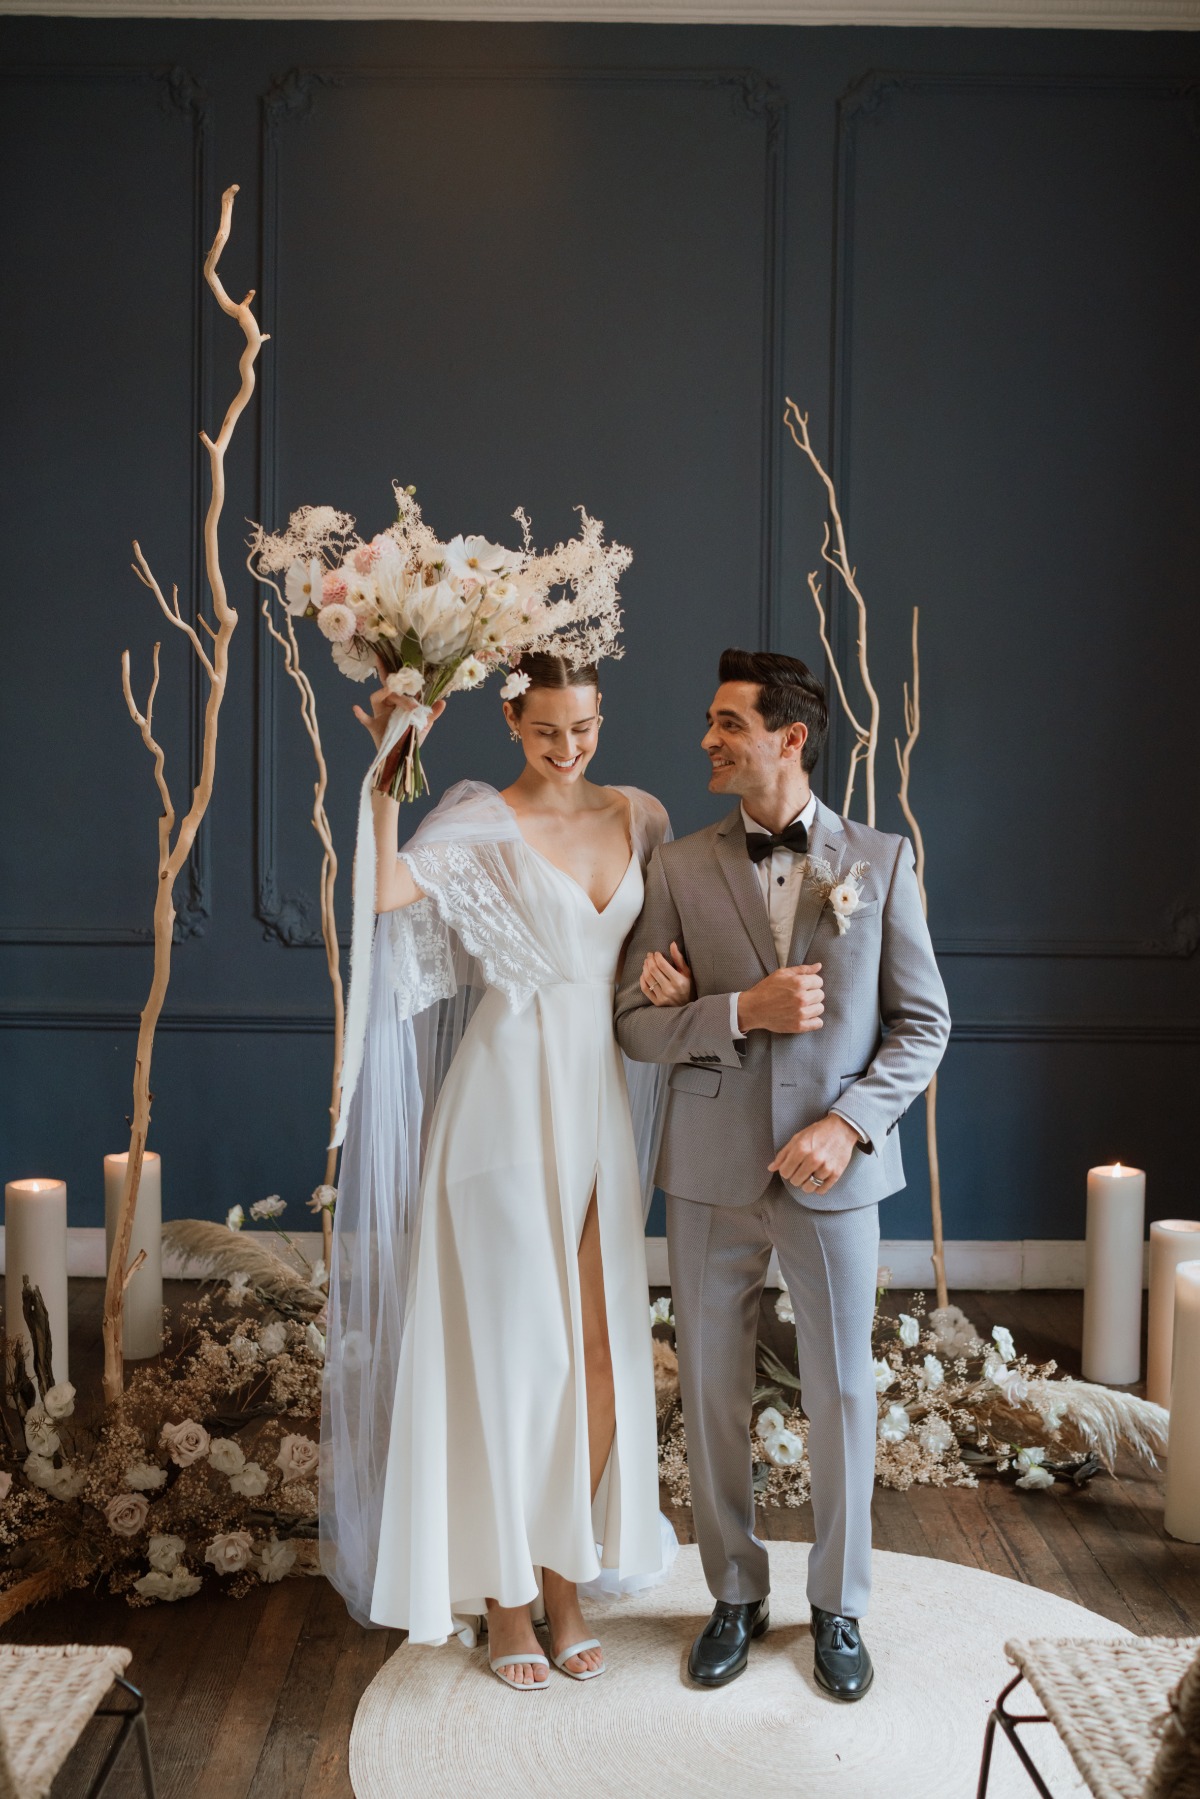 Married In Mexico City: A Destination Wedding With Class, Culture, And Style